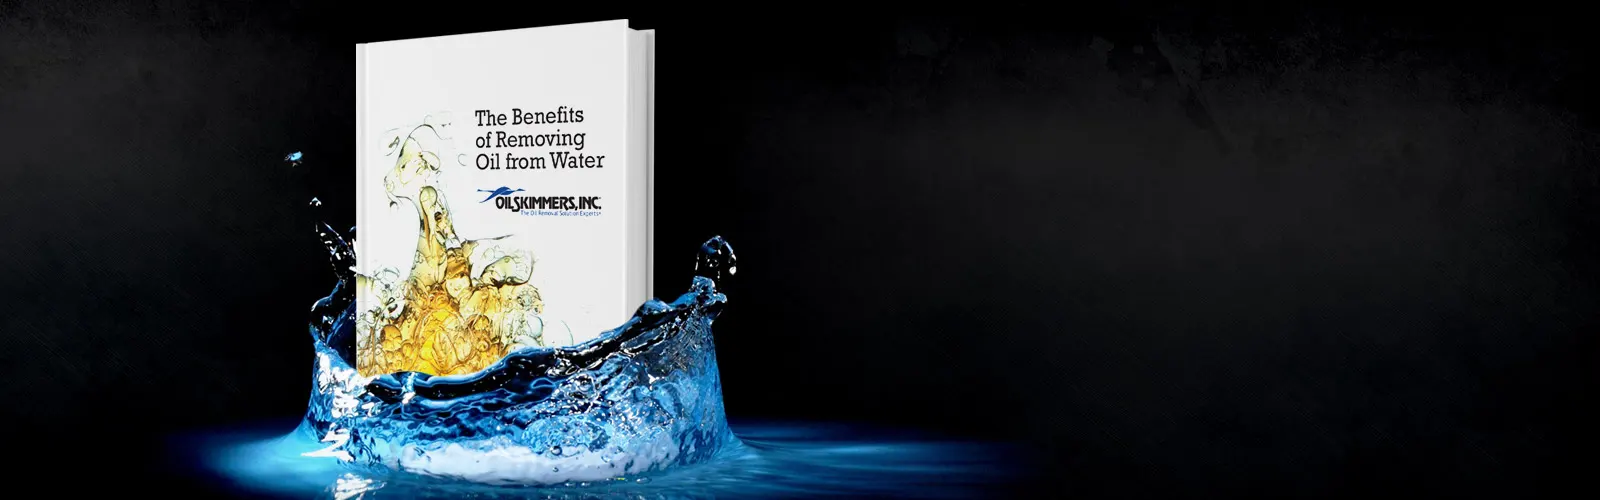 eBook - Benefits of Removing Oil from Water